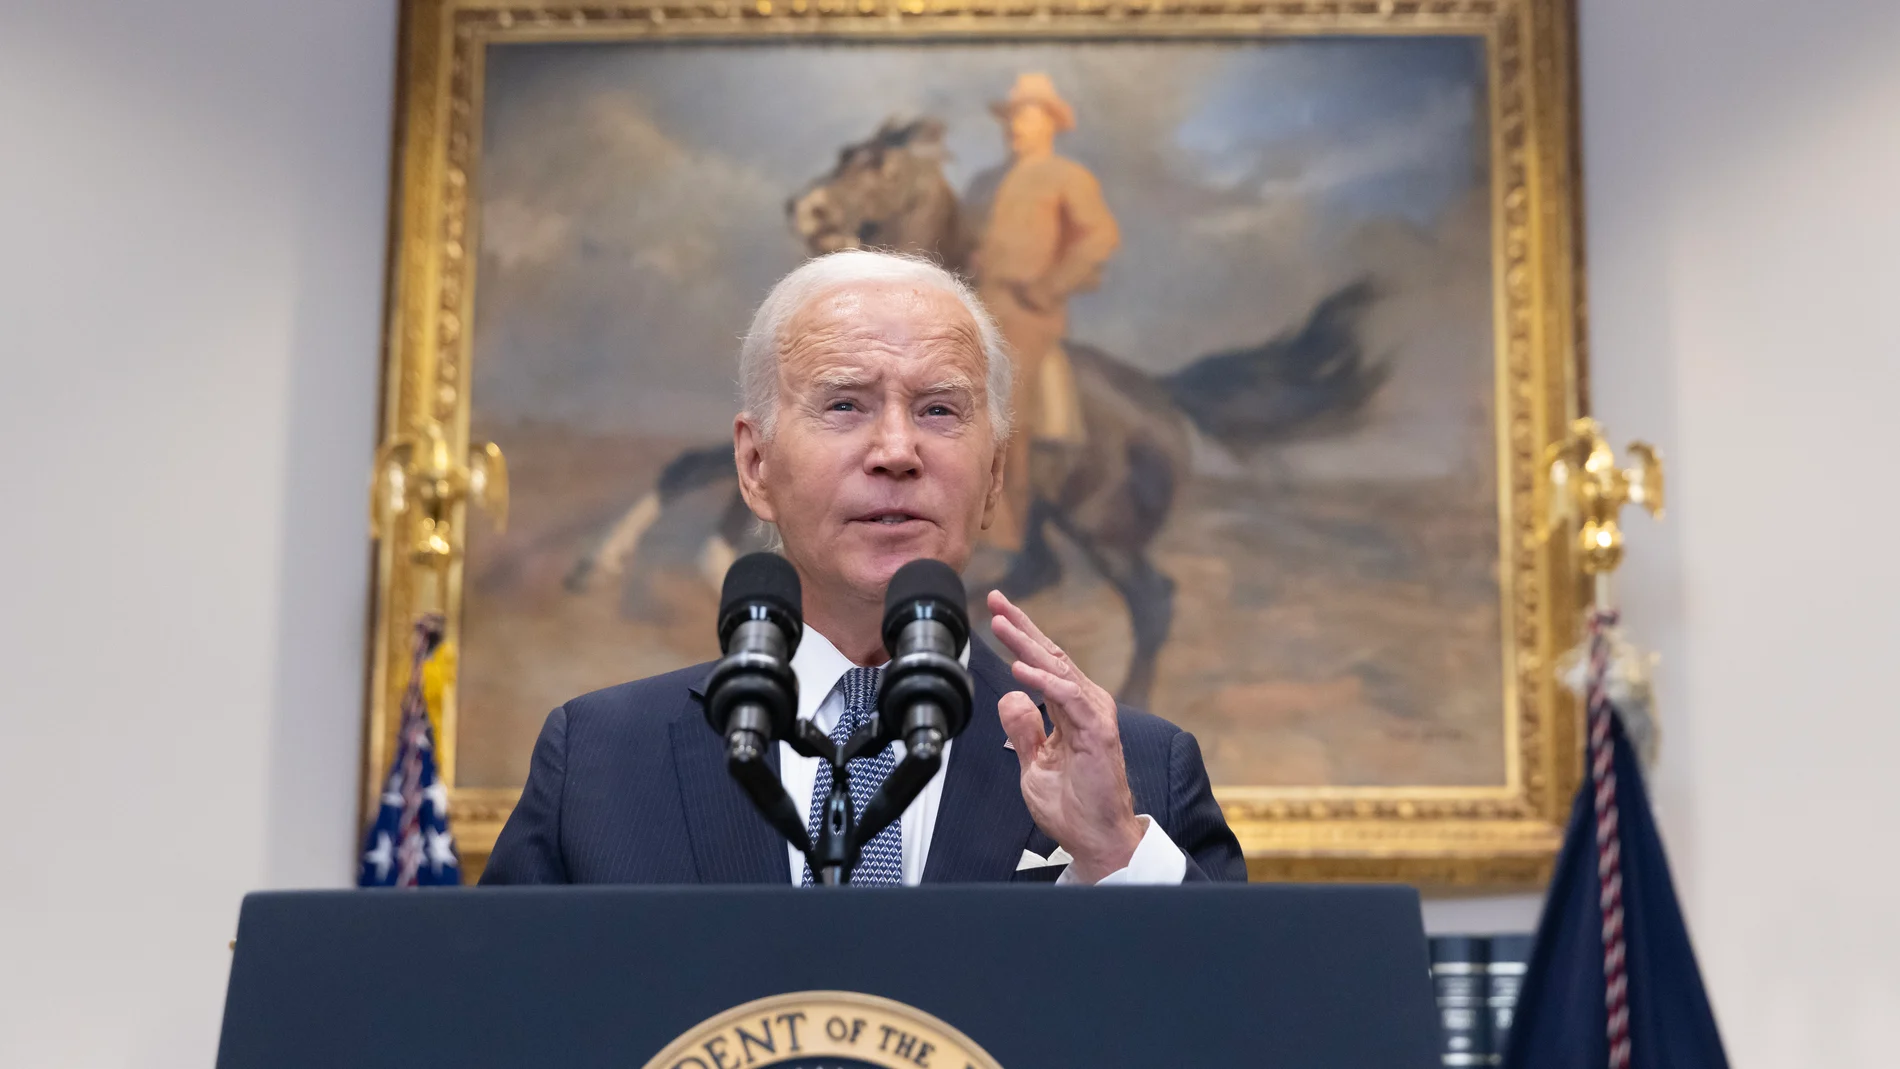 June 30, 2023, Washington, District of Columbia, USA: United States President Joe Biden delivers remarks in response to the decision by the United States Supreme Court to block his administration's student loan forgiveness plan, in the Roosevelt Room of the White House in Washington, DC, USA, 30 June 2023. The decision by the Supreme Court prevents the Biden administration from delivering a plan to provide student debt relief to borrowers making less than 125,000 USD per year 30/06/2023